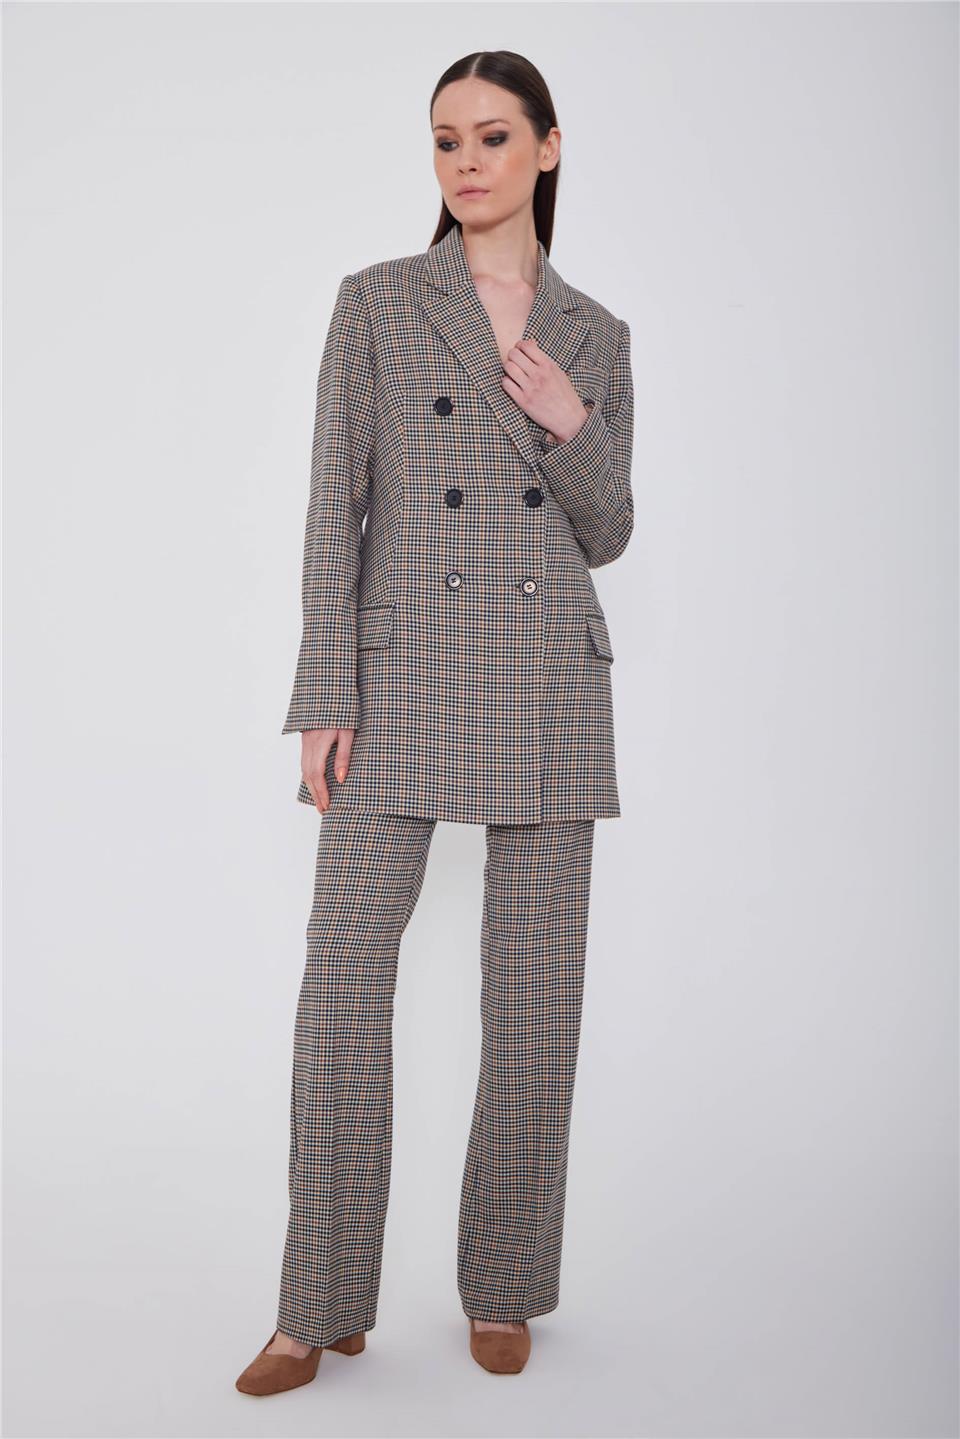 A model wears LFN10796 - Plaid Trousers - Gray, wholesale Pants of Lefon to display at Lonca